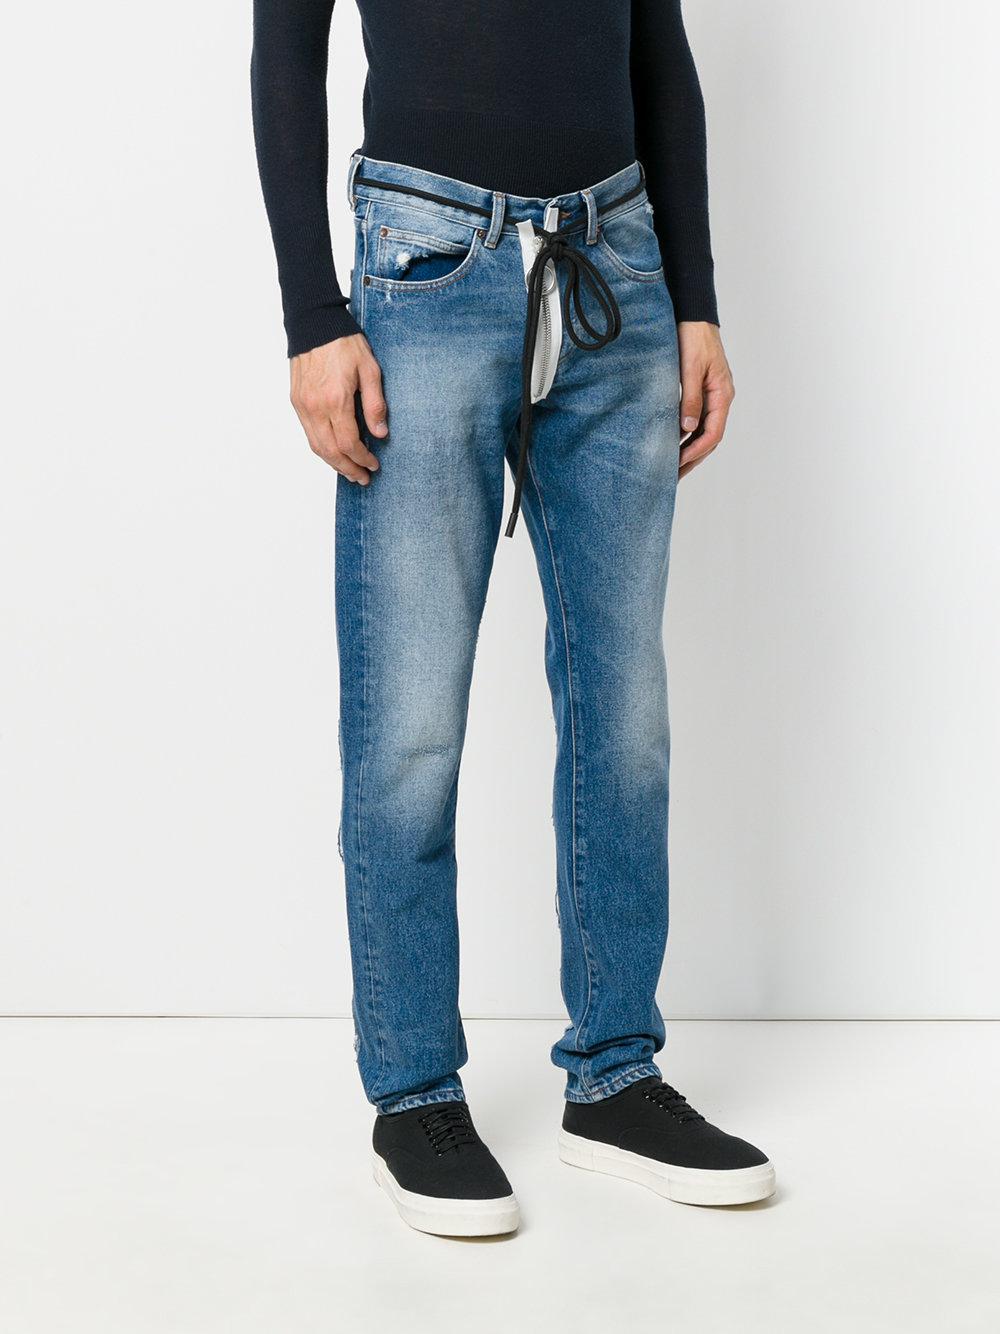 Off-White c/o Virgil Abloh String Tie Faded Jeans in Blue